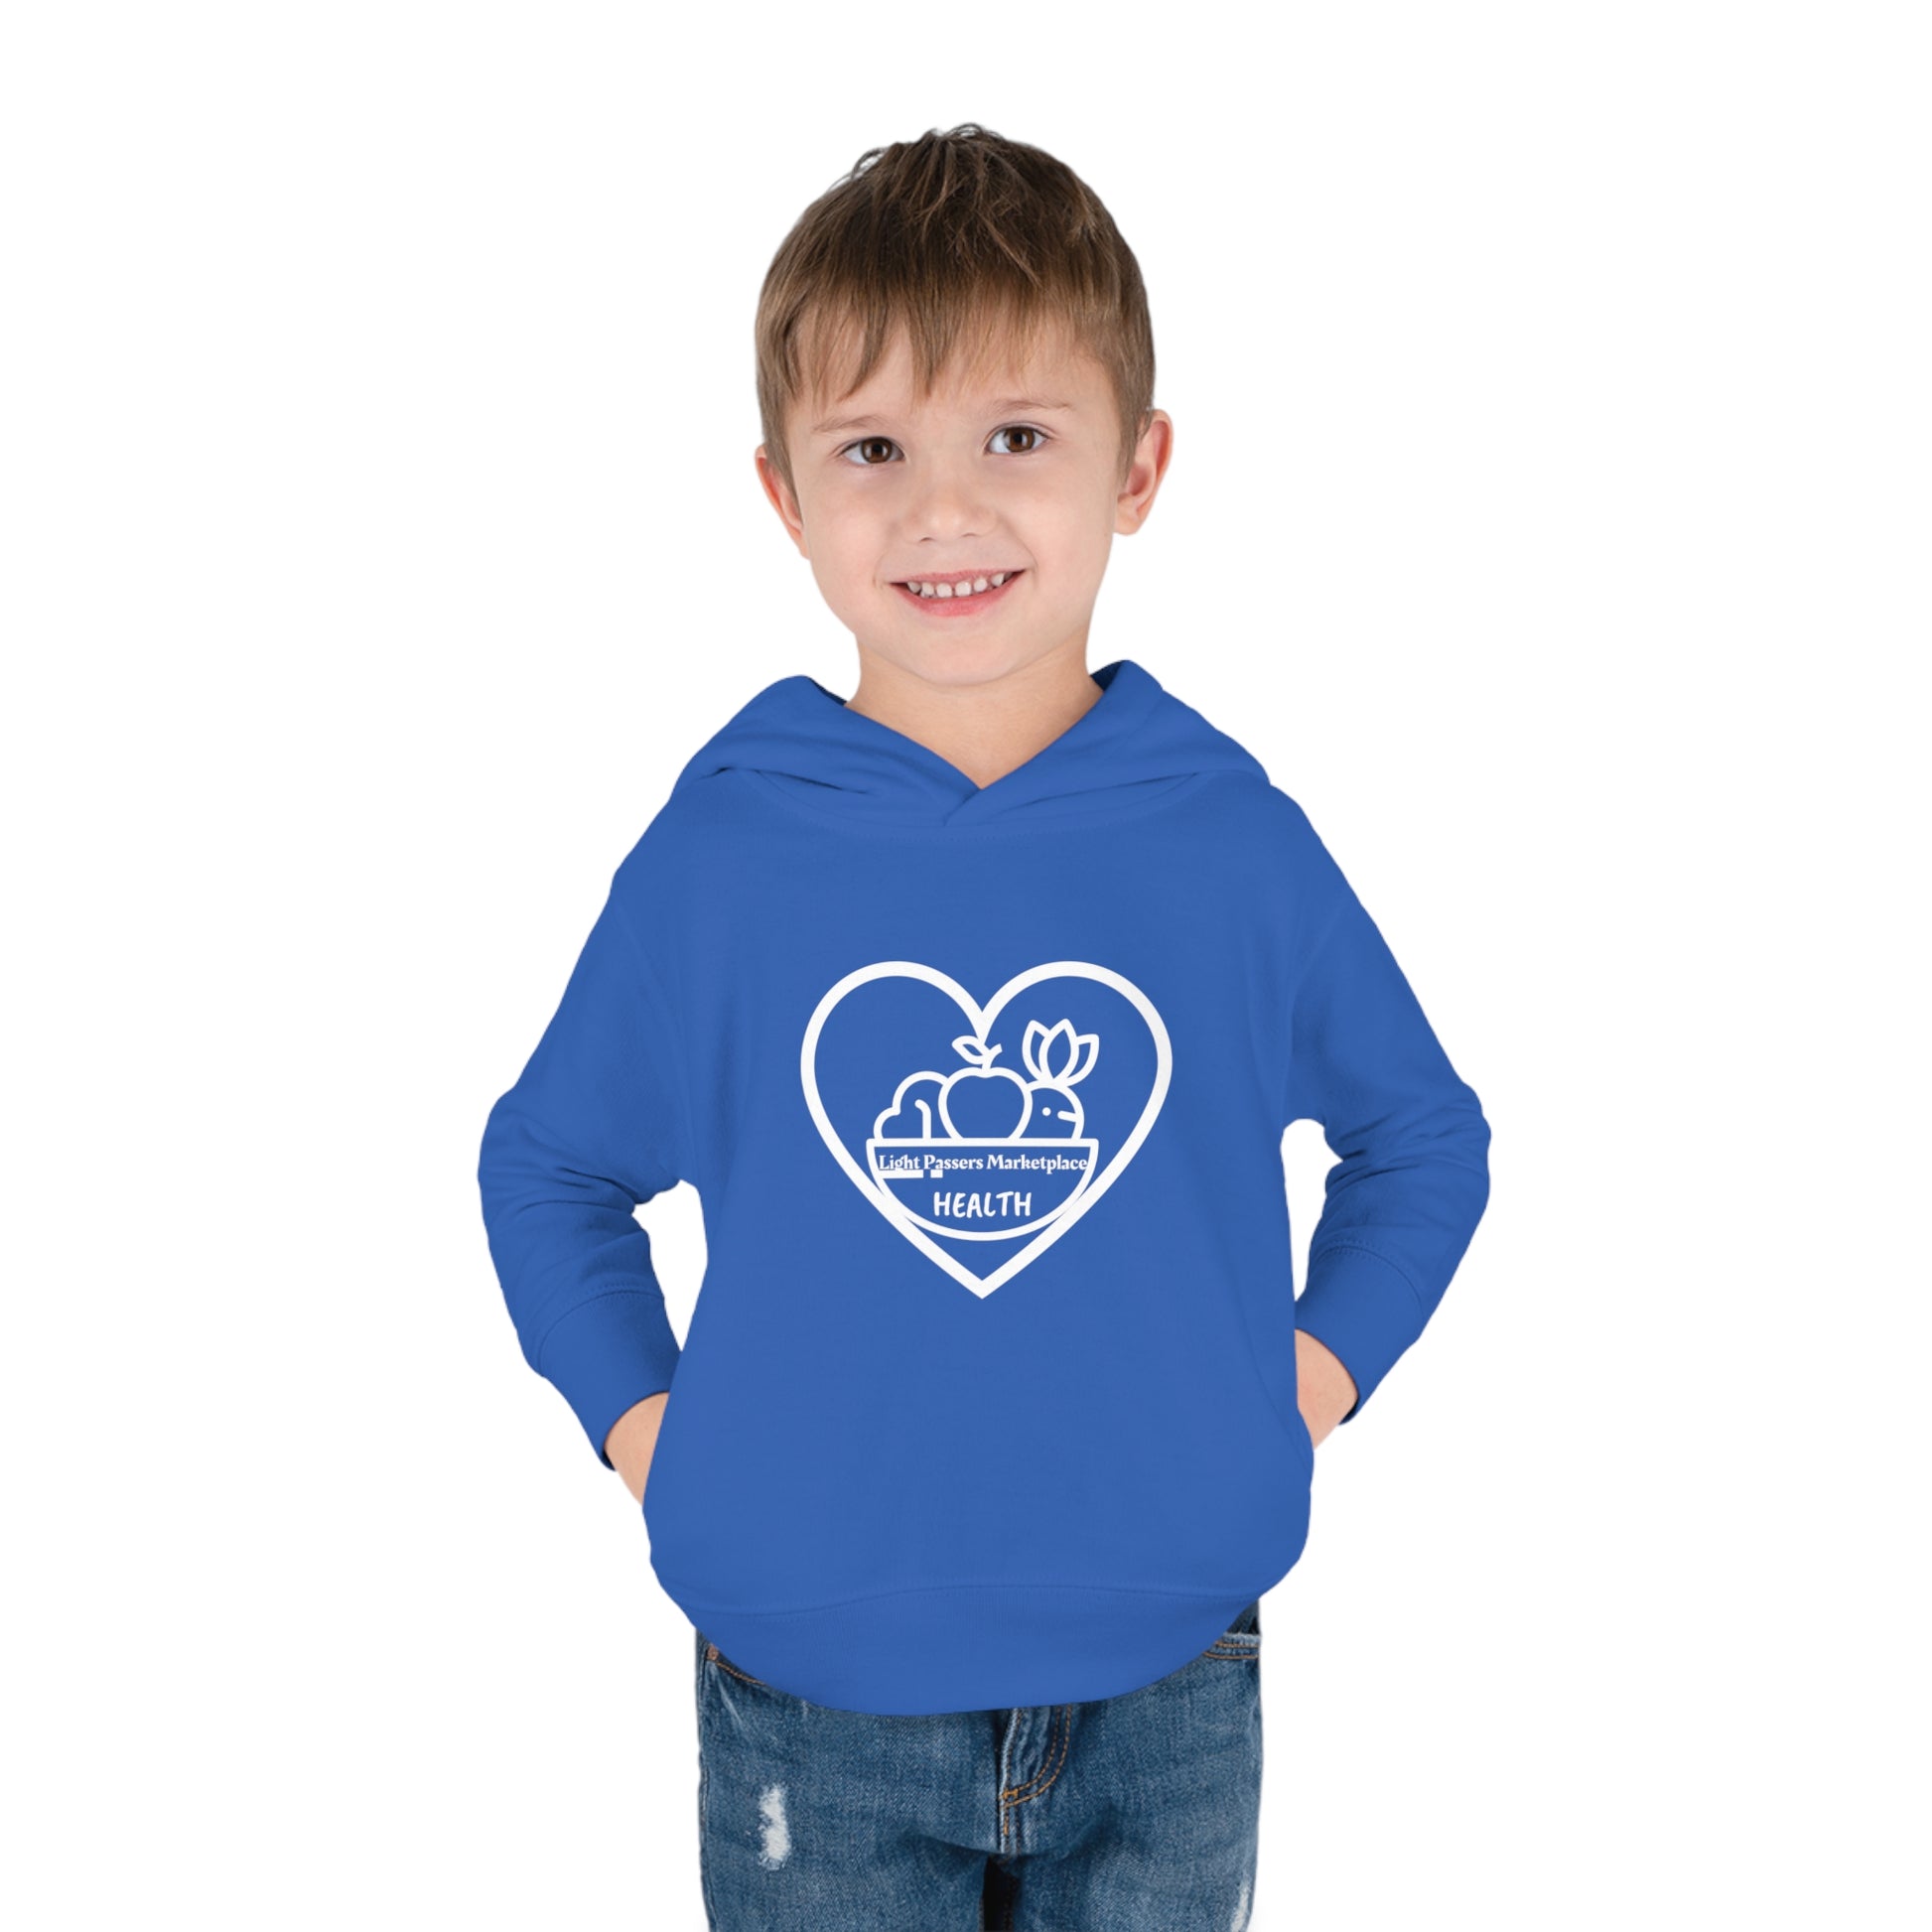 A toddler wearing a blue Fruit Basket Toddler Hoodie with heart and bird designs. Features include a jersey-lined hood, cover-stitched details, side seam pockets, and durable fabric blend for cozy wear.